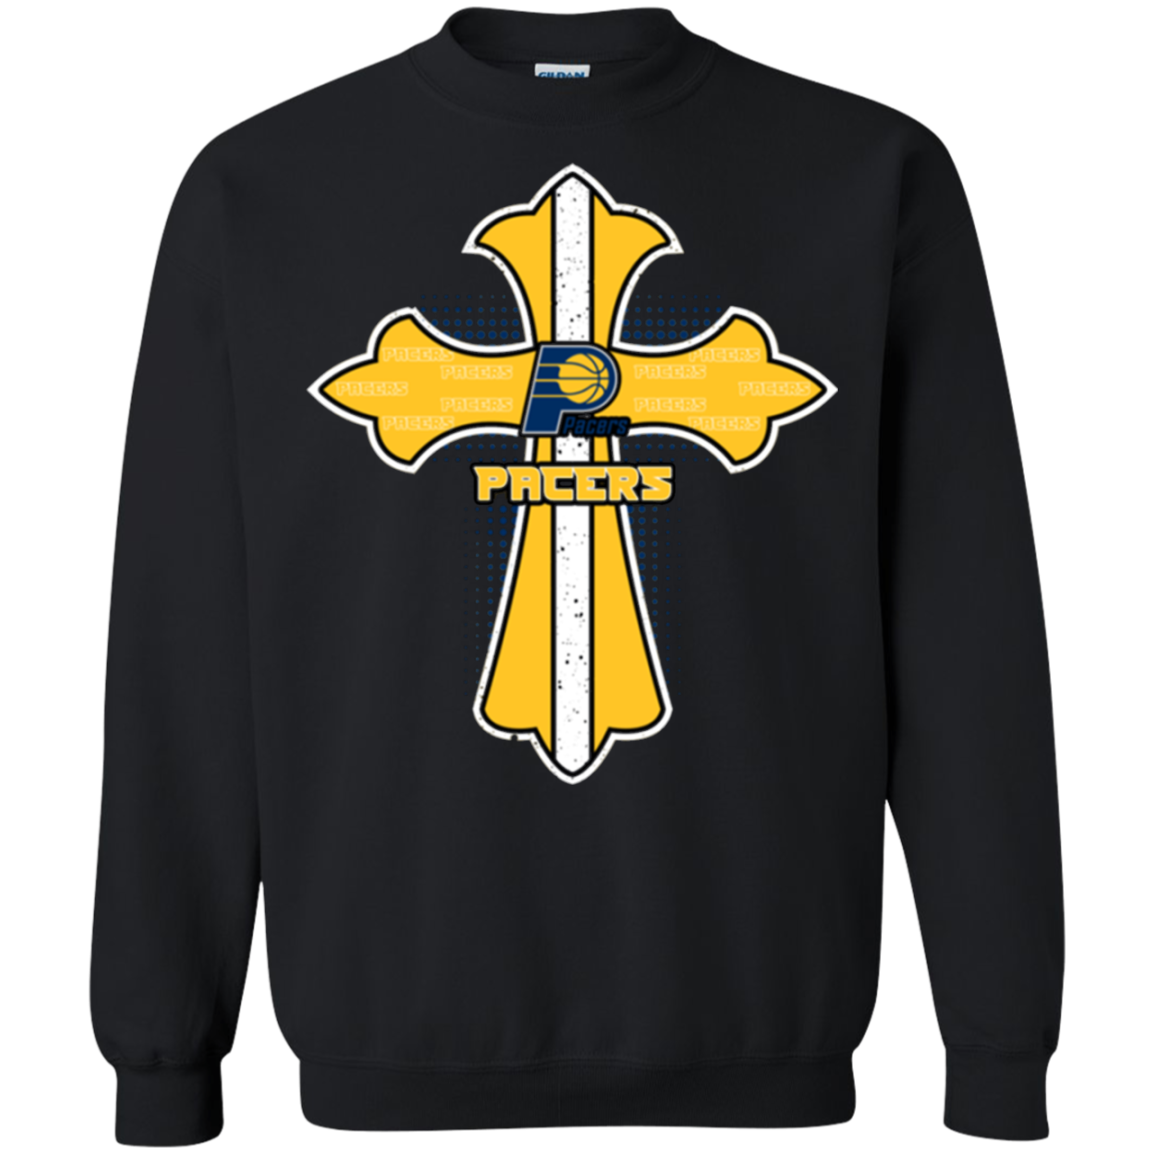 Cross Shirt For Jesus And Indiana Pacers Fans 